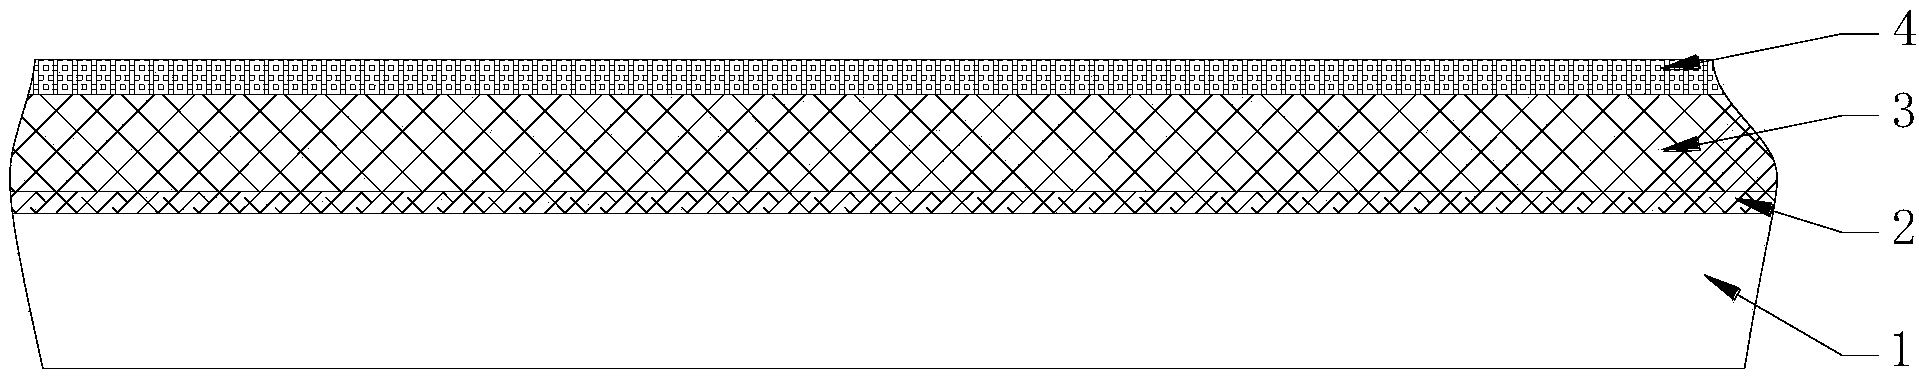 Antibacterial-layer panel of electronic product